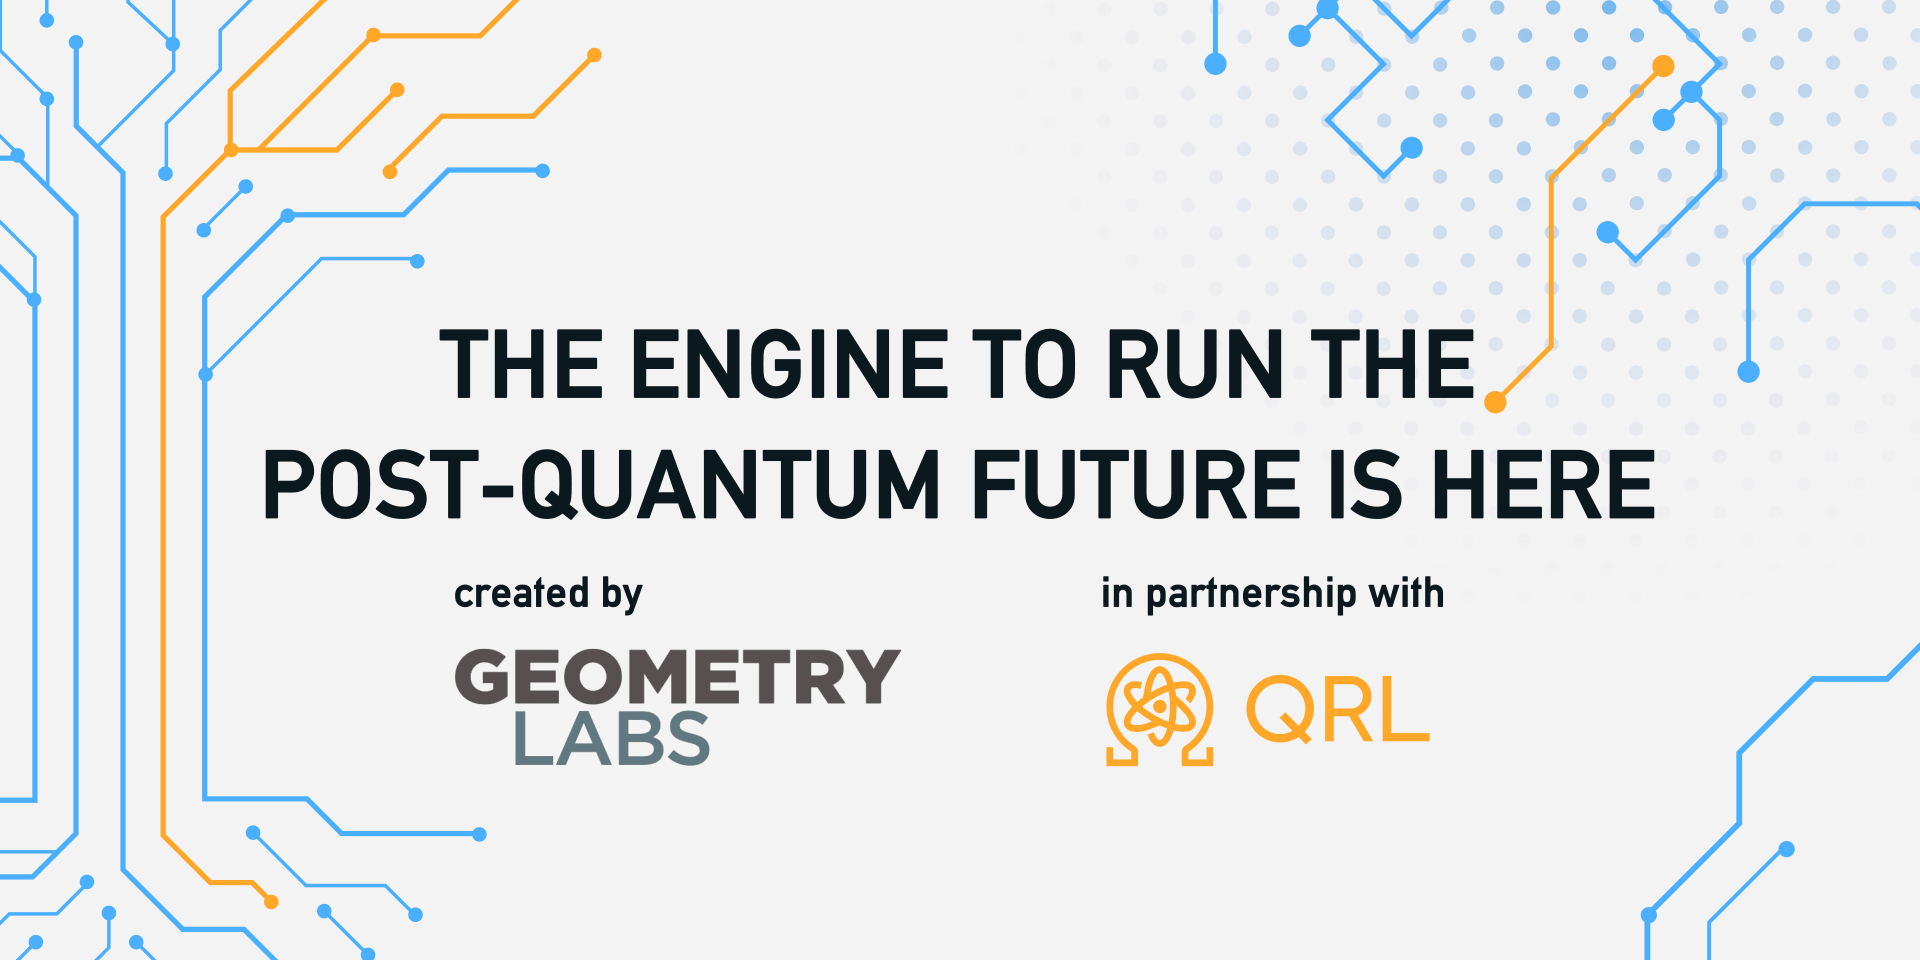 The Engine to Run the Post-Quantum Future is Here